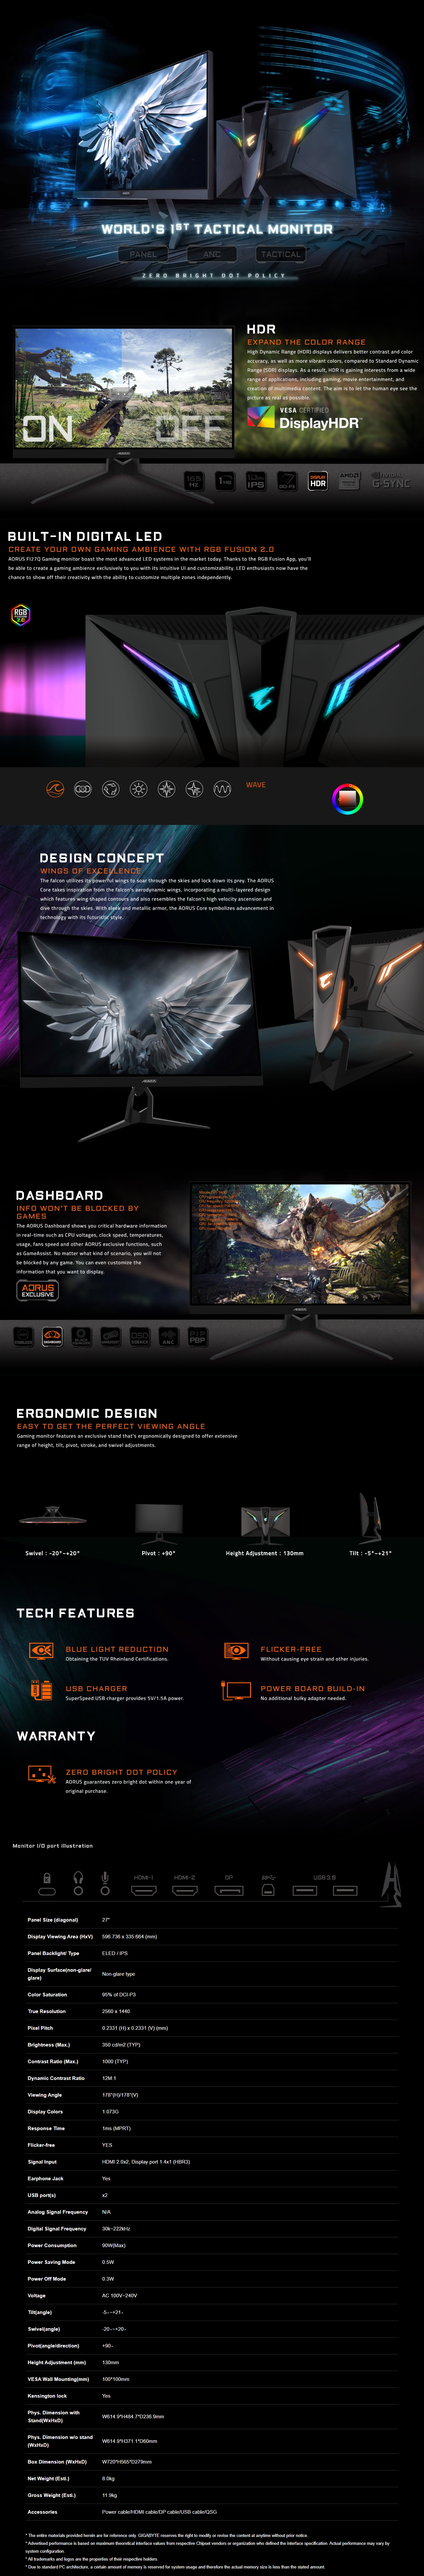 A large marketing image providing additional information about the product Gigabyte Aorus FI27Q 27" WQHD G-SYNC-C HDR400 165Hz 1MS IPS LED Gaming Monitor - Additional alt info not provided